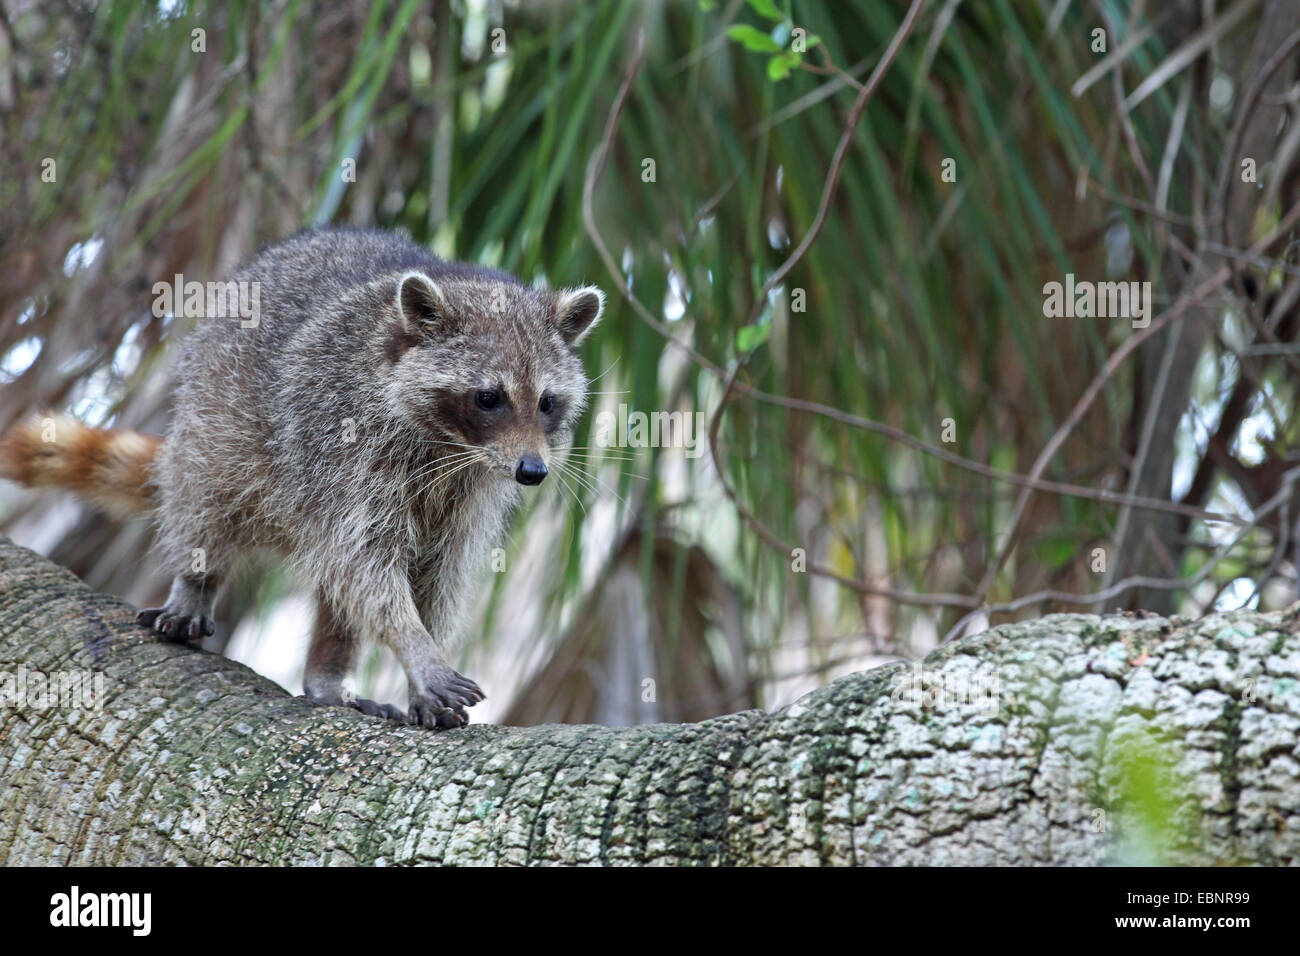 common raccoon (Procyon lotor), young racoon goes on a palm stem, USA, Florida, Fort de Soto Stock Photo